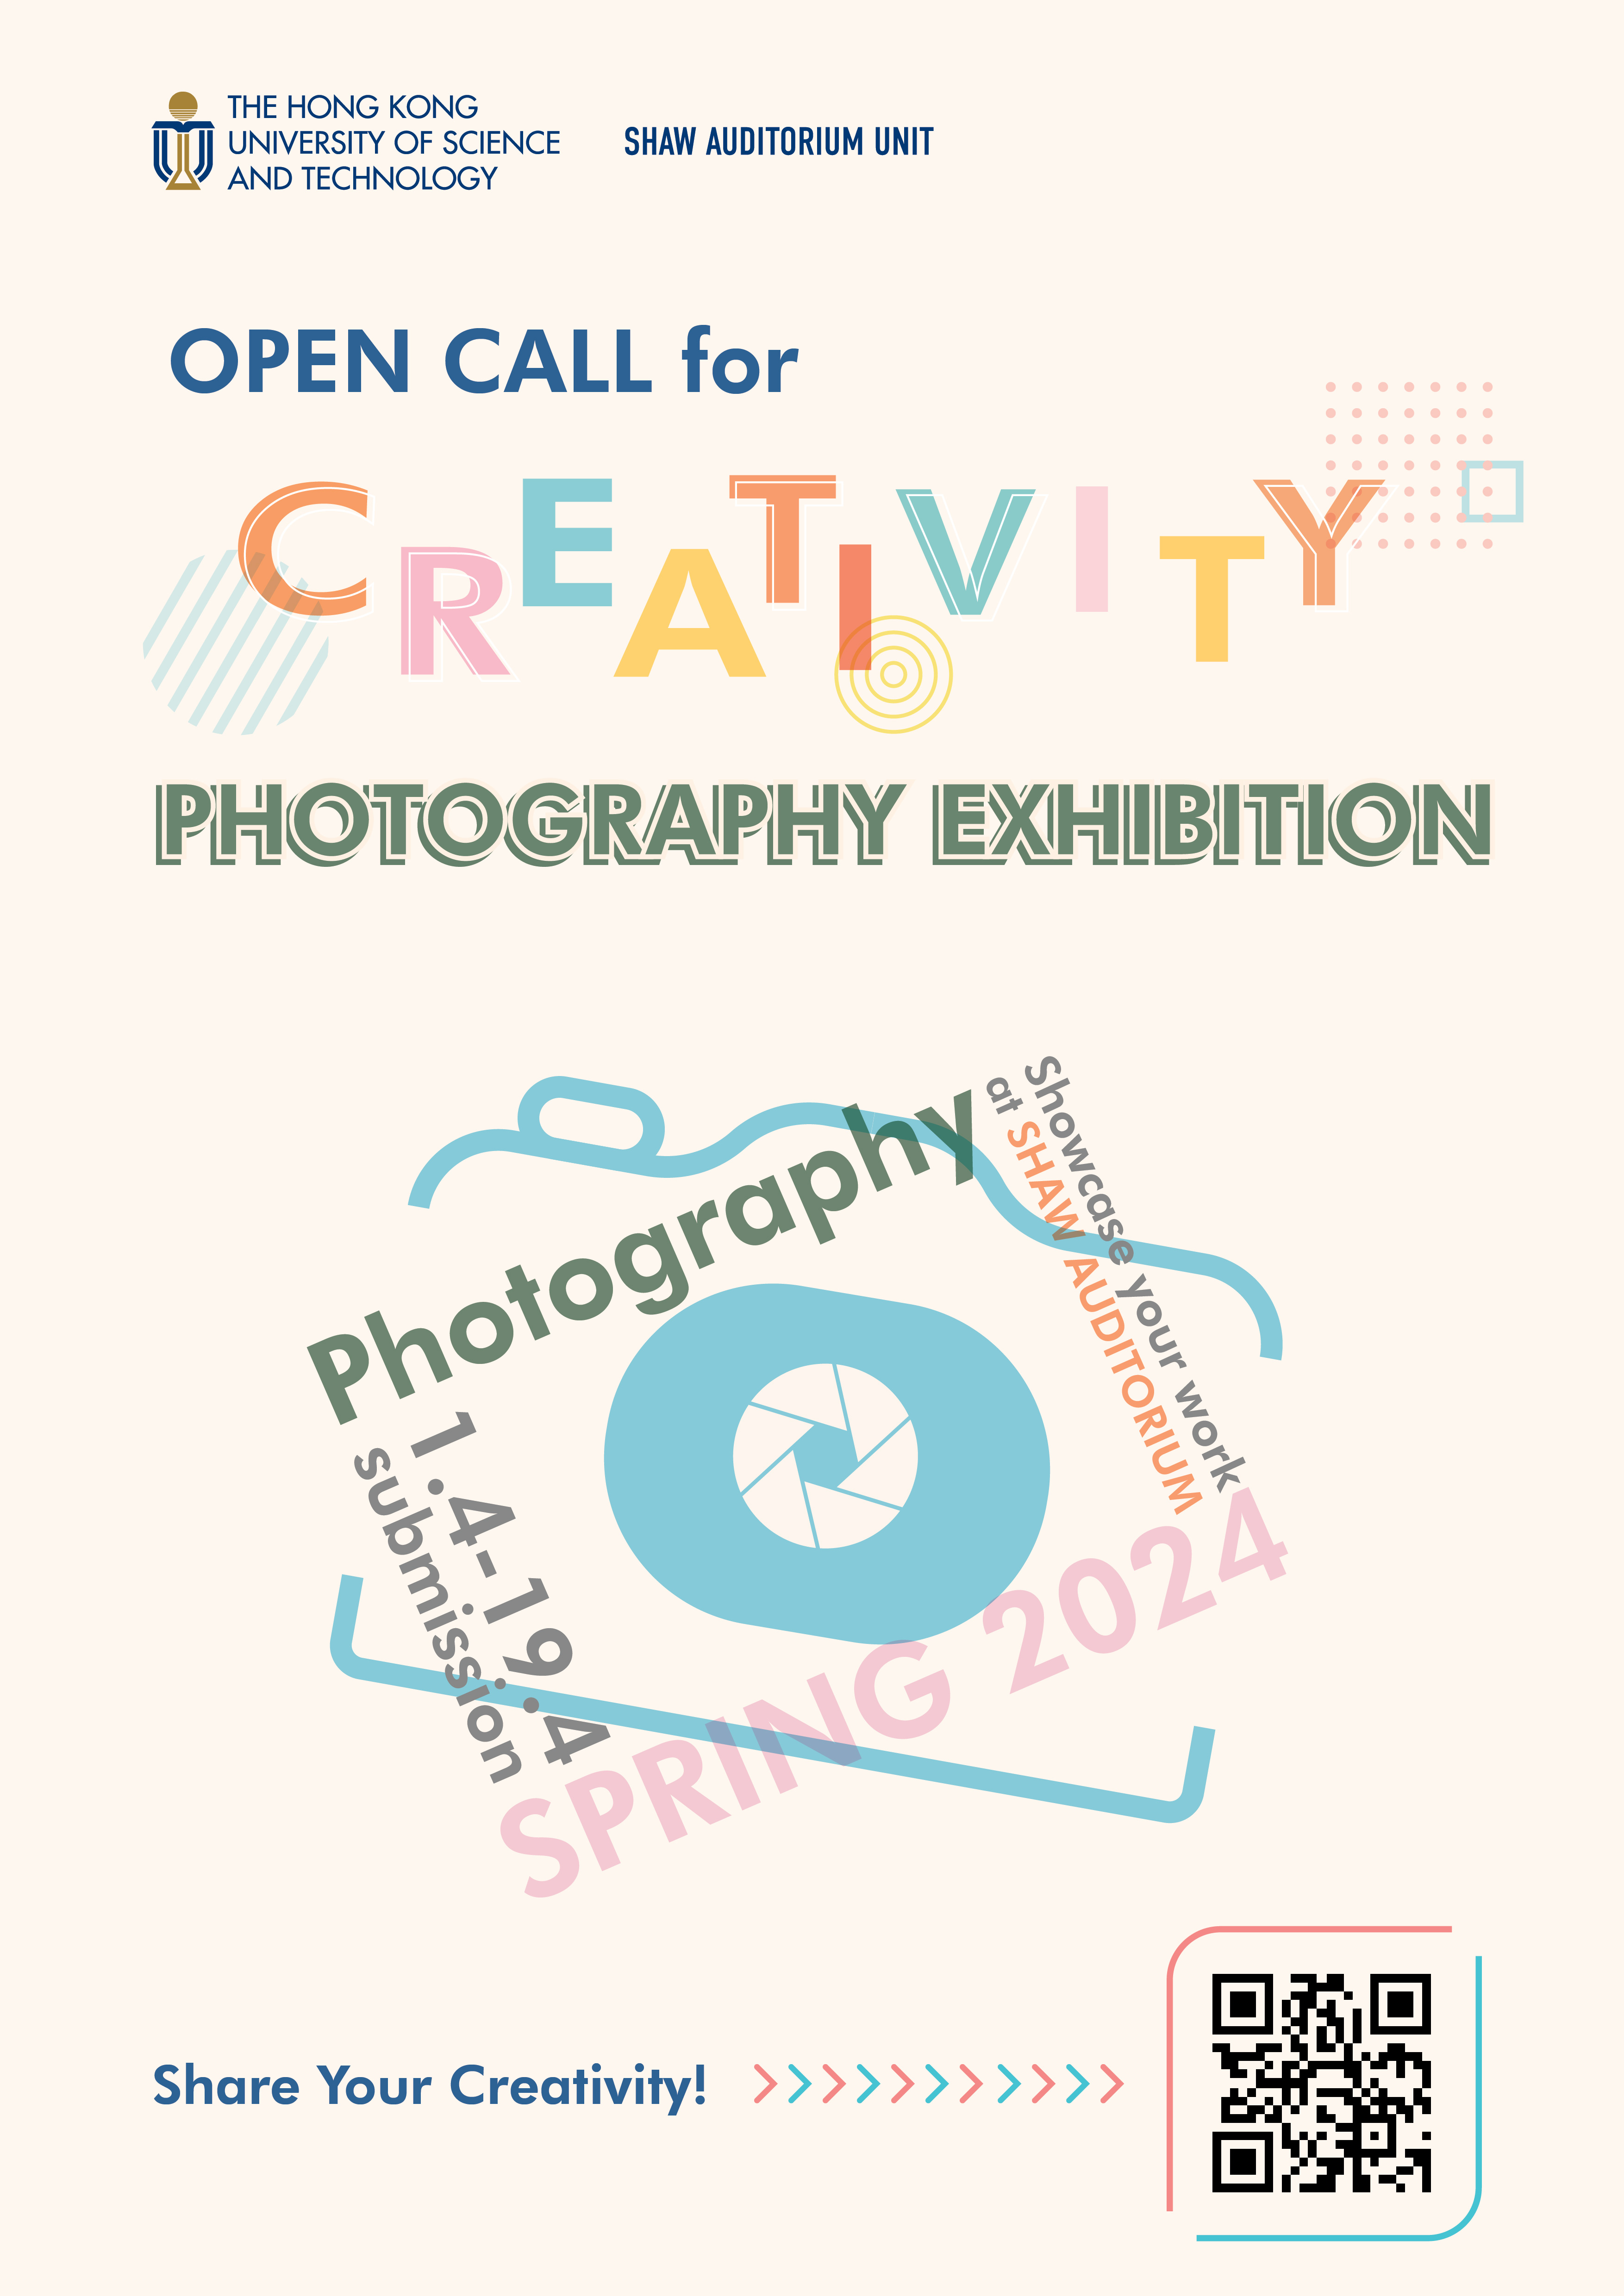 Open Call for Creativity - Photography Exhibition